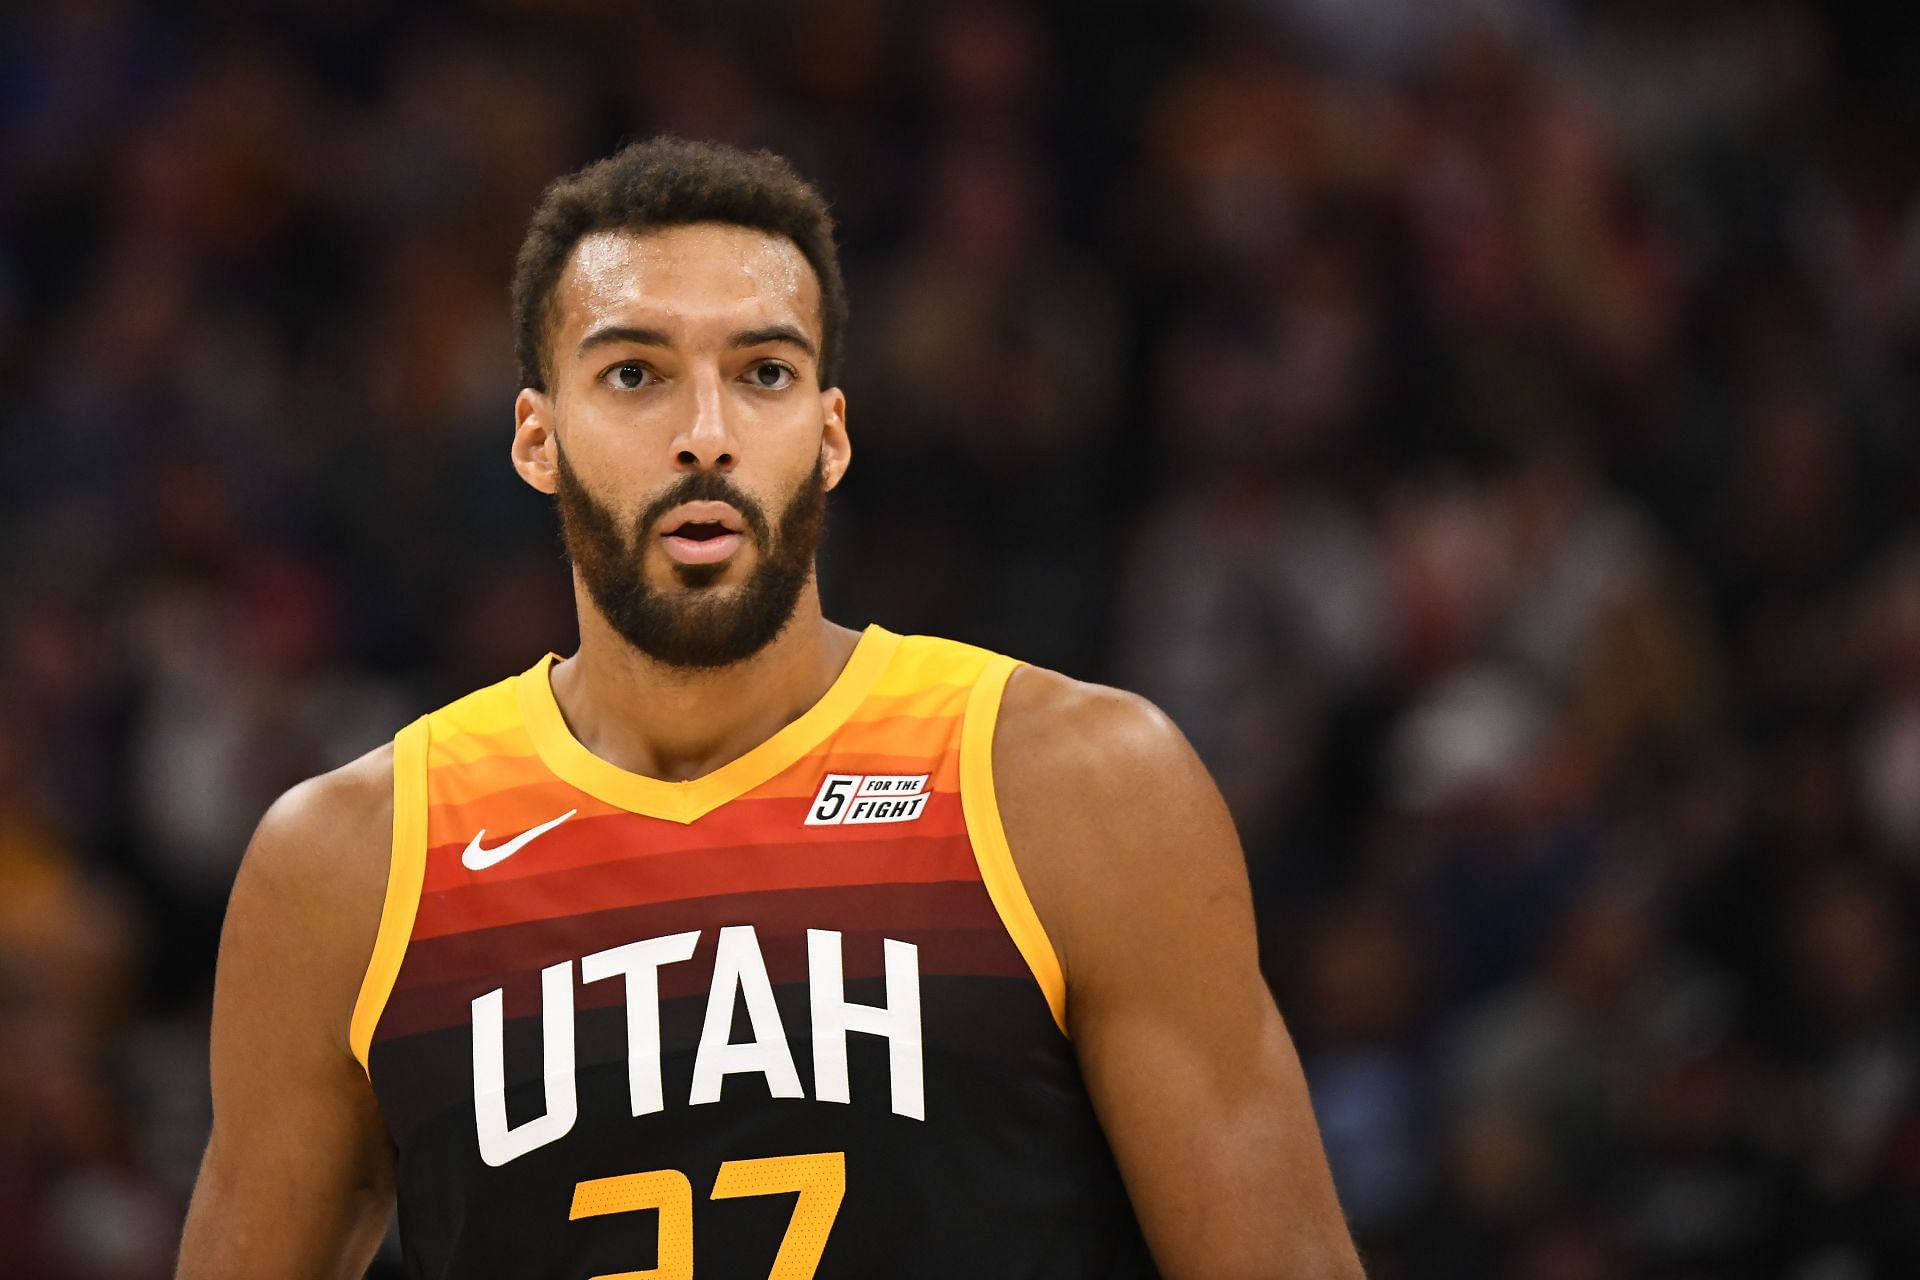 Rudy Gobert has shined during the first week of NBA play for the Utah Jazz